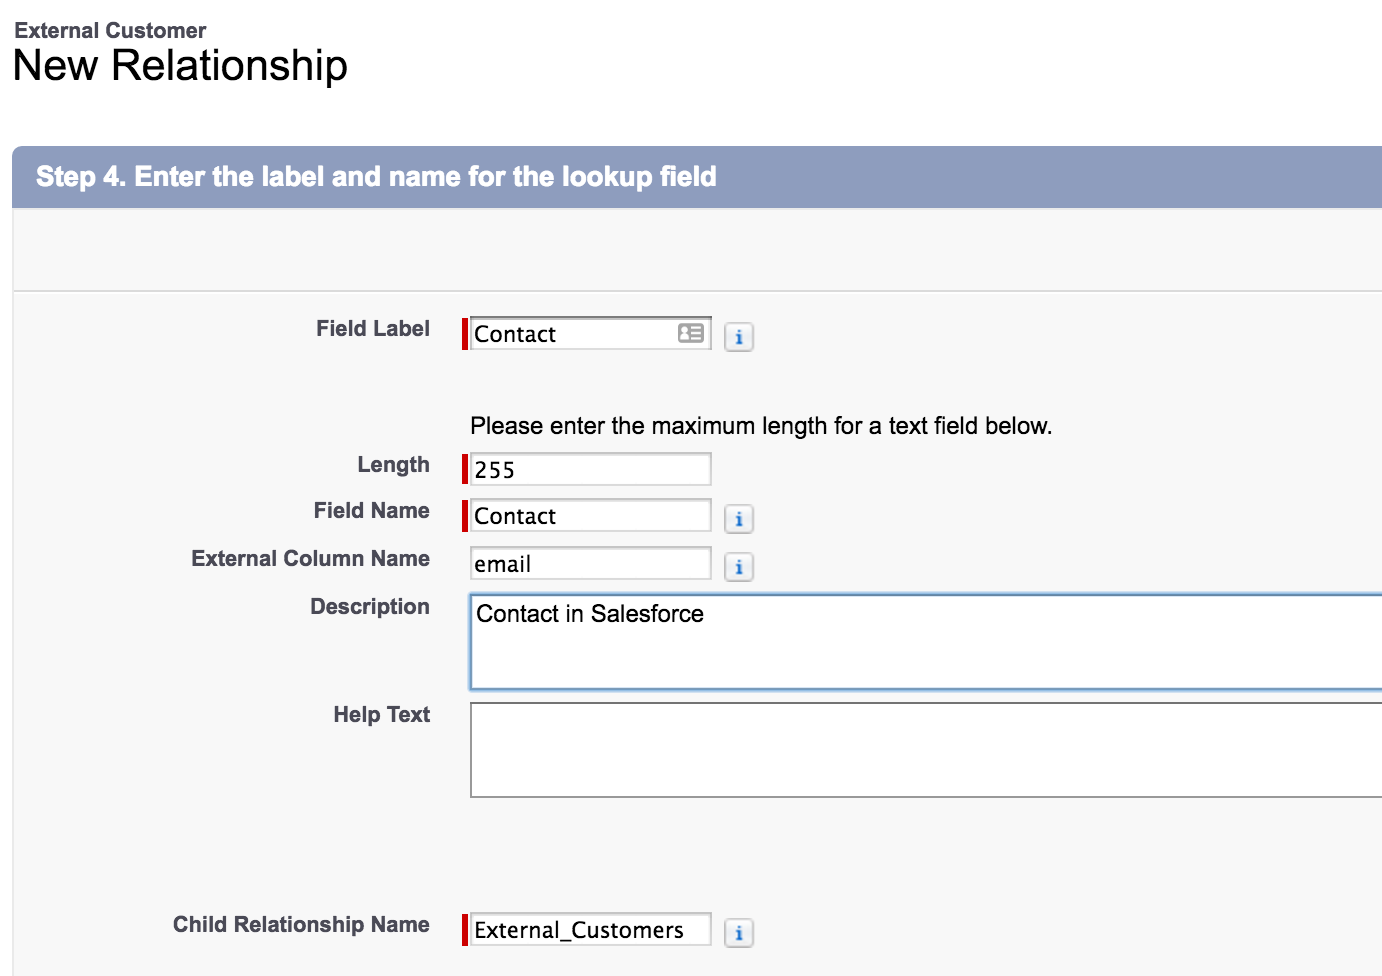 Salesforce UI - new relationship, step 4: name of lookup field